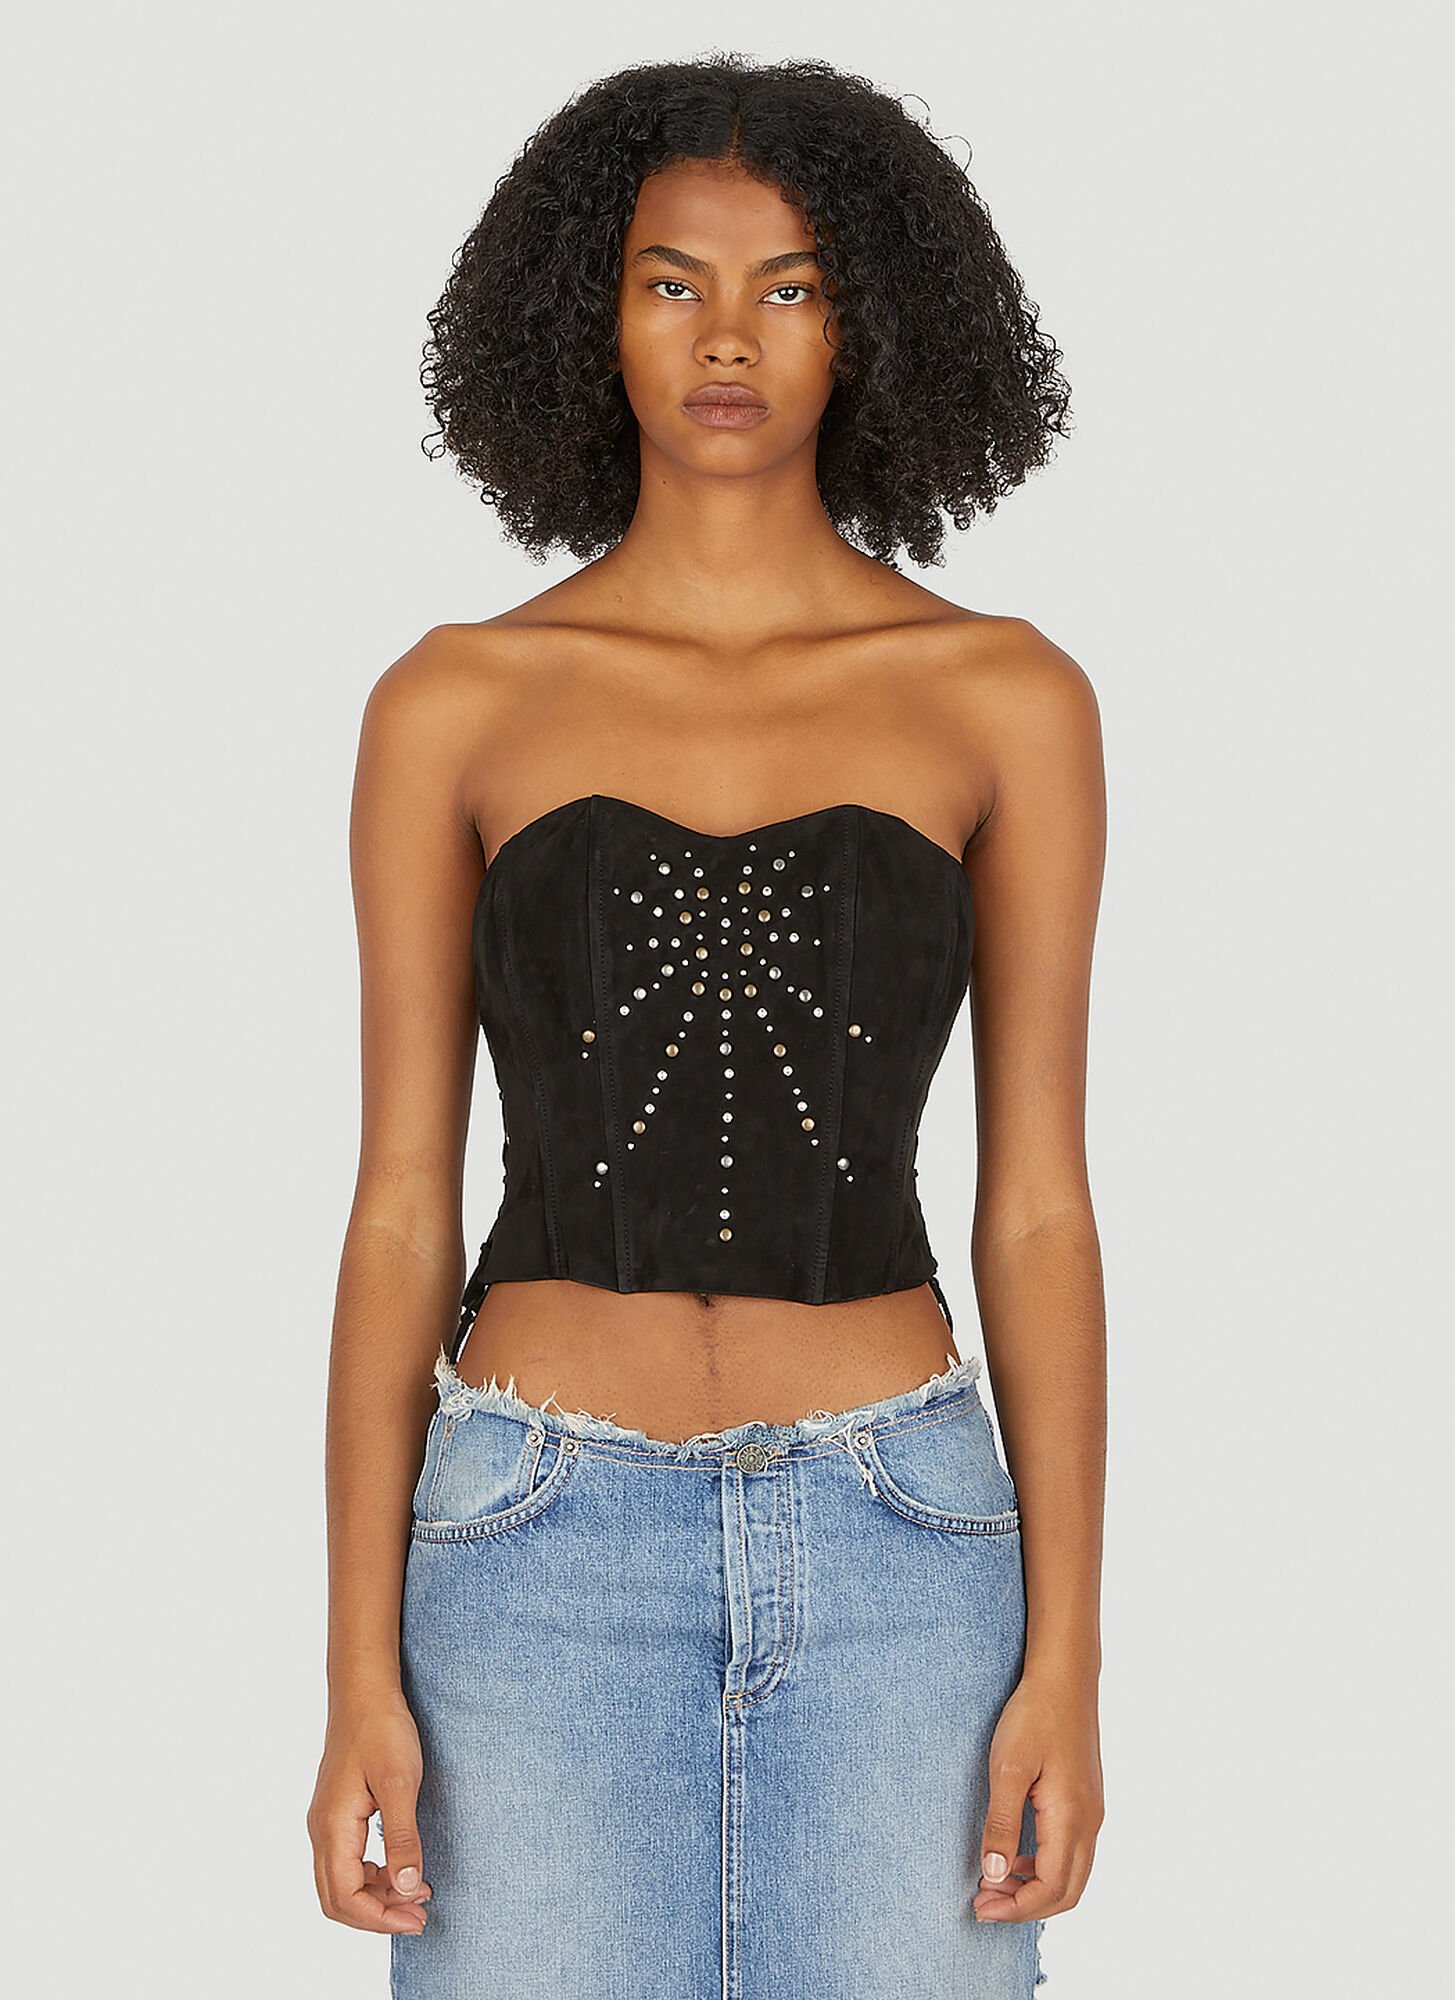 Guess Usa Lace Up Bustier Top Female Black